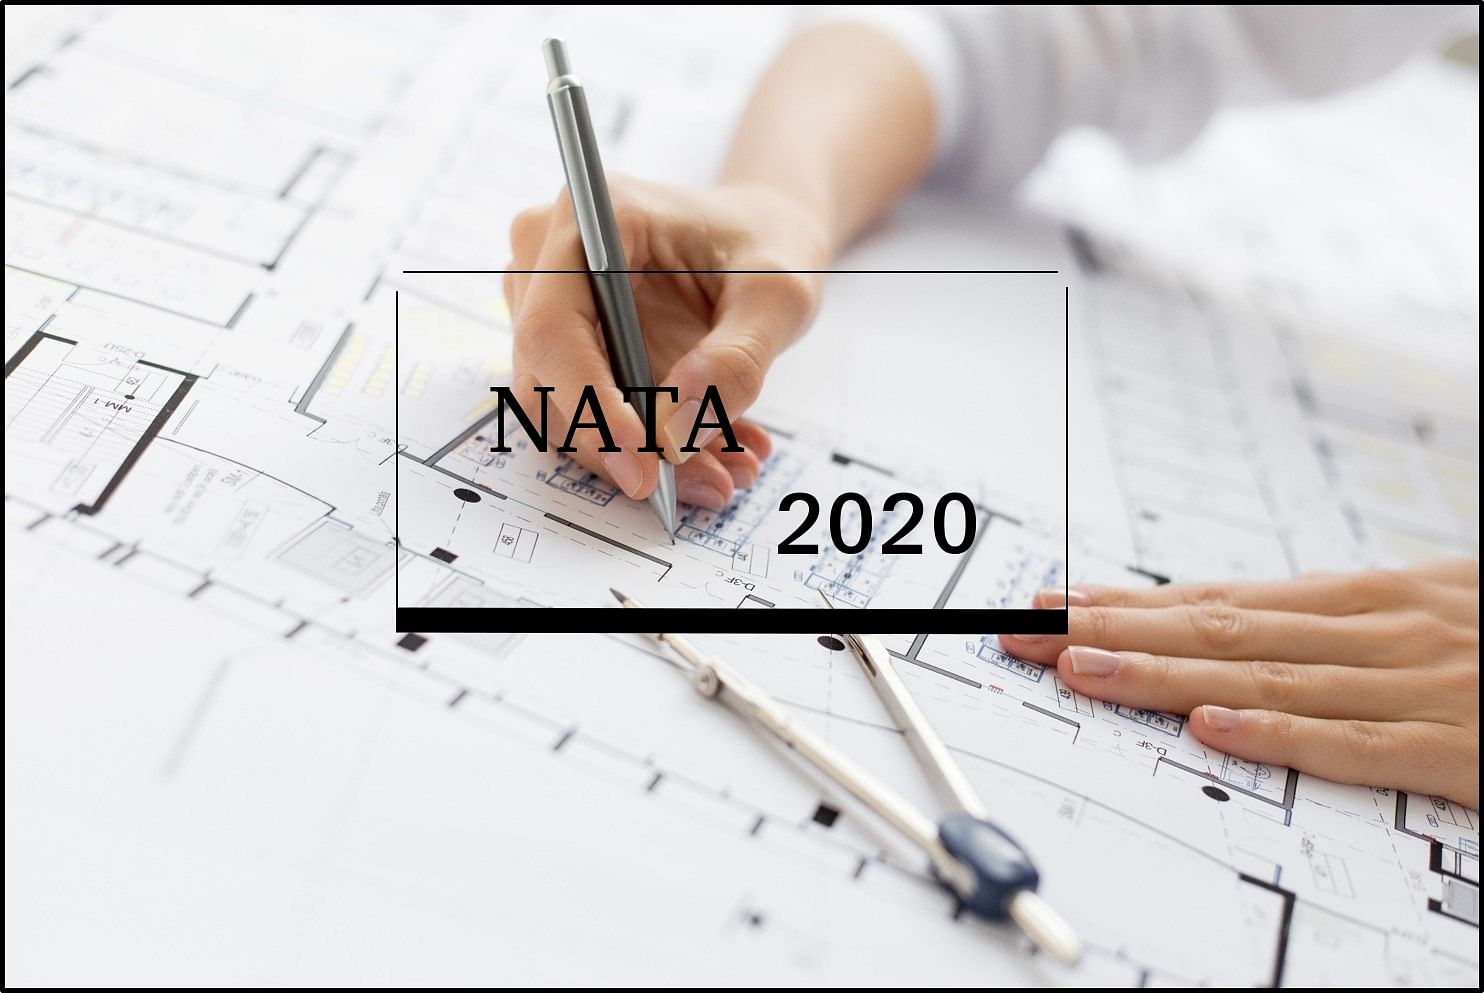 NATA 2020: Registration Process Extended, Check Revised Date